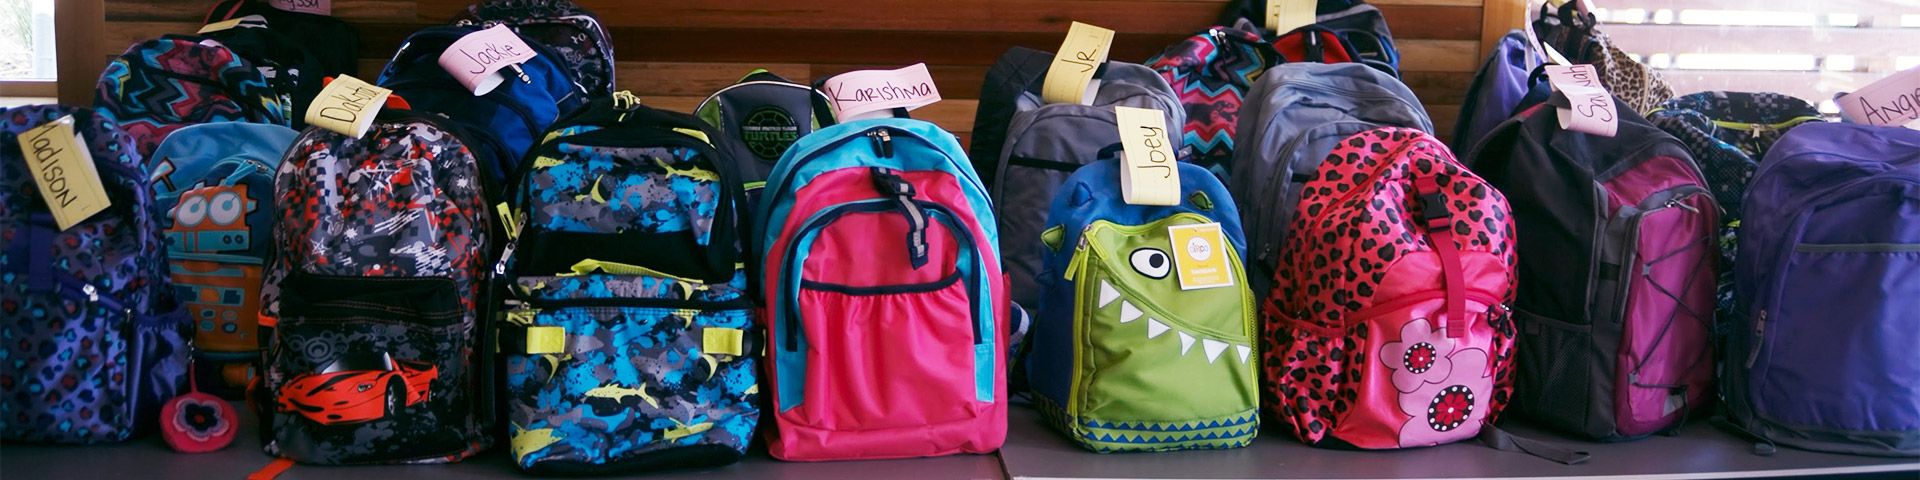 Backpacks on a table